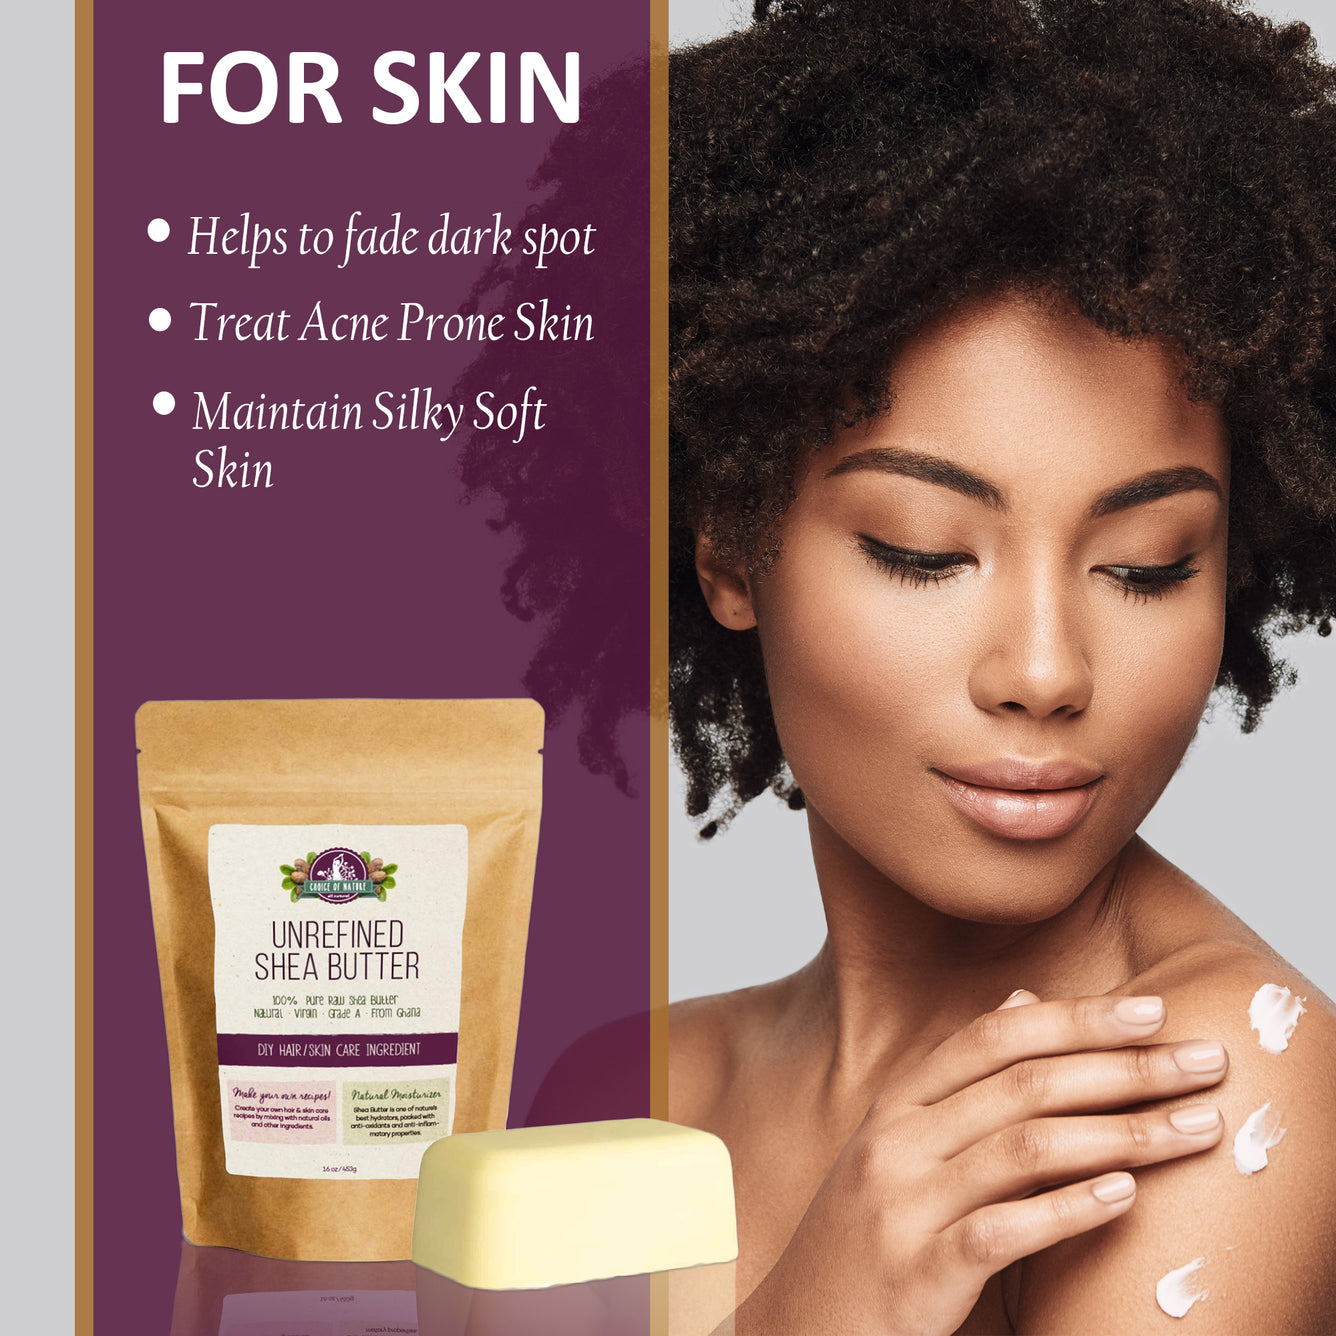 Choice of Nature Unrefined Shea Butter Bar 16oz Mitchell Brands - Mitchell Brands - Skin Lightening, Skin Brightening, Fade Dark Spots, Shea Butter, Hair Growth Products